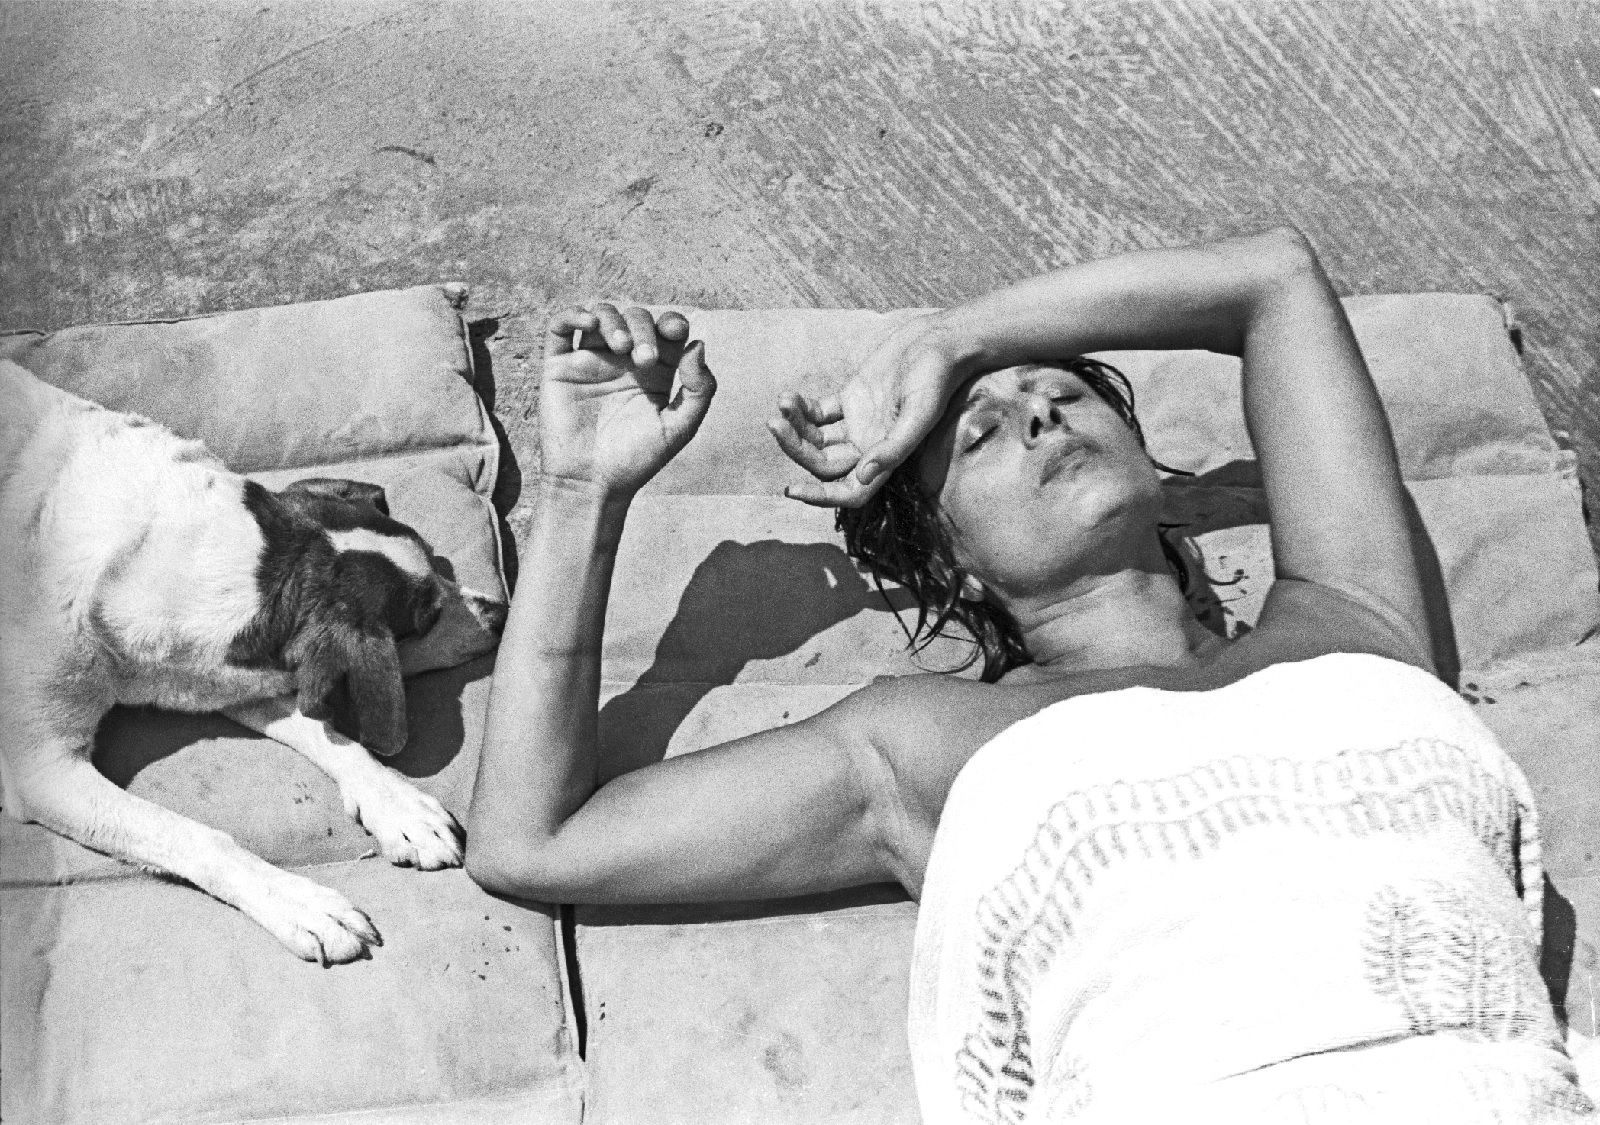 Gucci's favourite photographer on display at Maxxi in Rome Paolo Di Paolo. Mondo Perduto: a moving journey through Italy during the 1950s and 1960s.